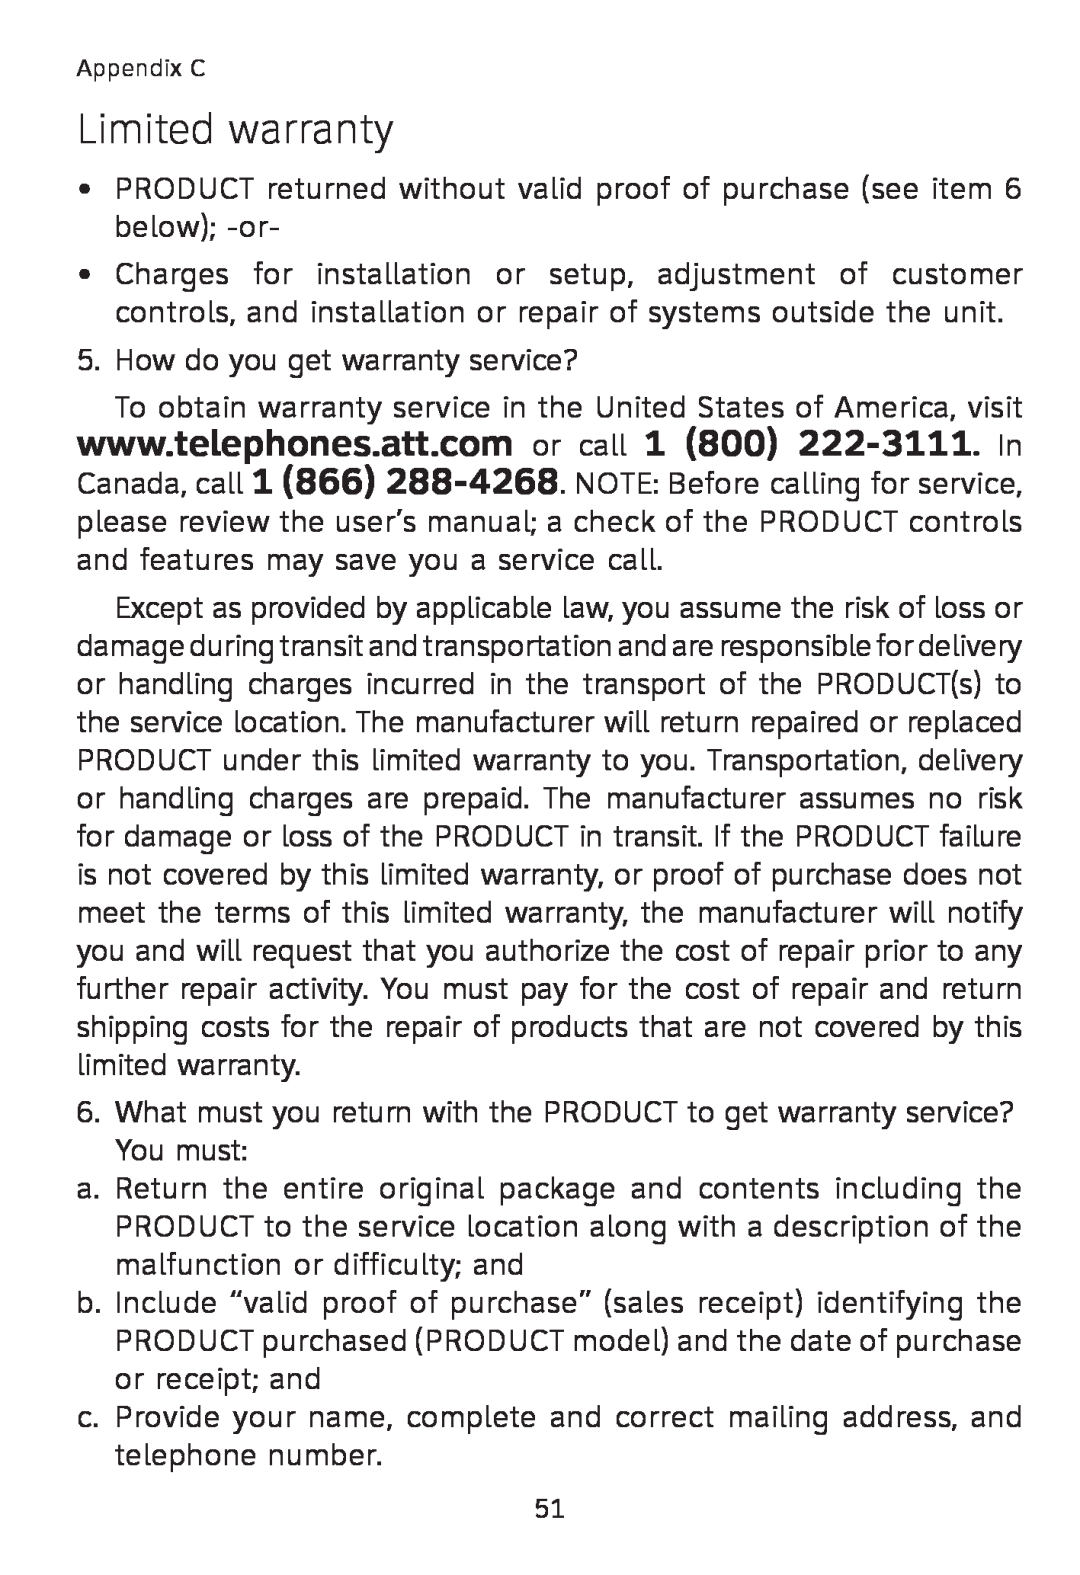 AT&T TL7600 user manual Limited warranty, How do you get warranty service? 